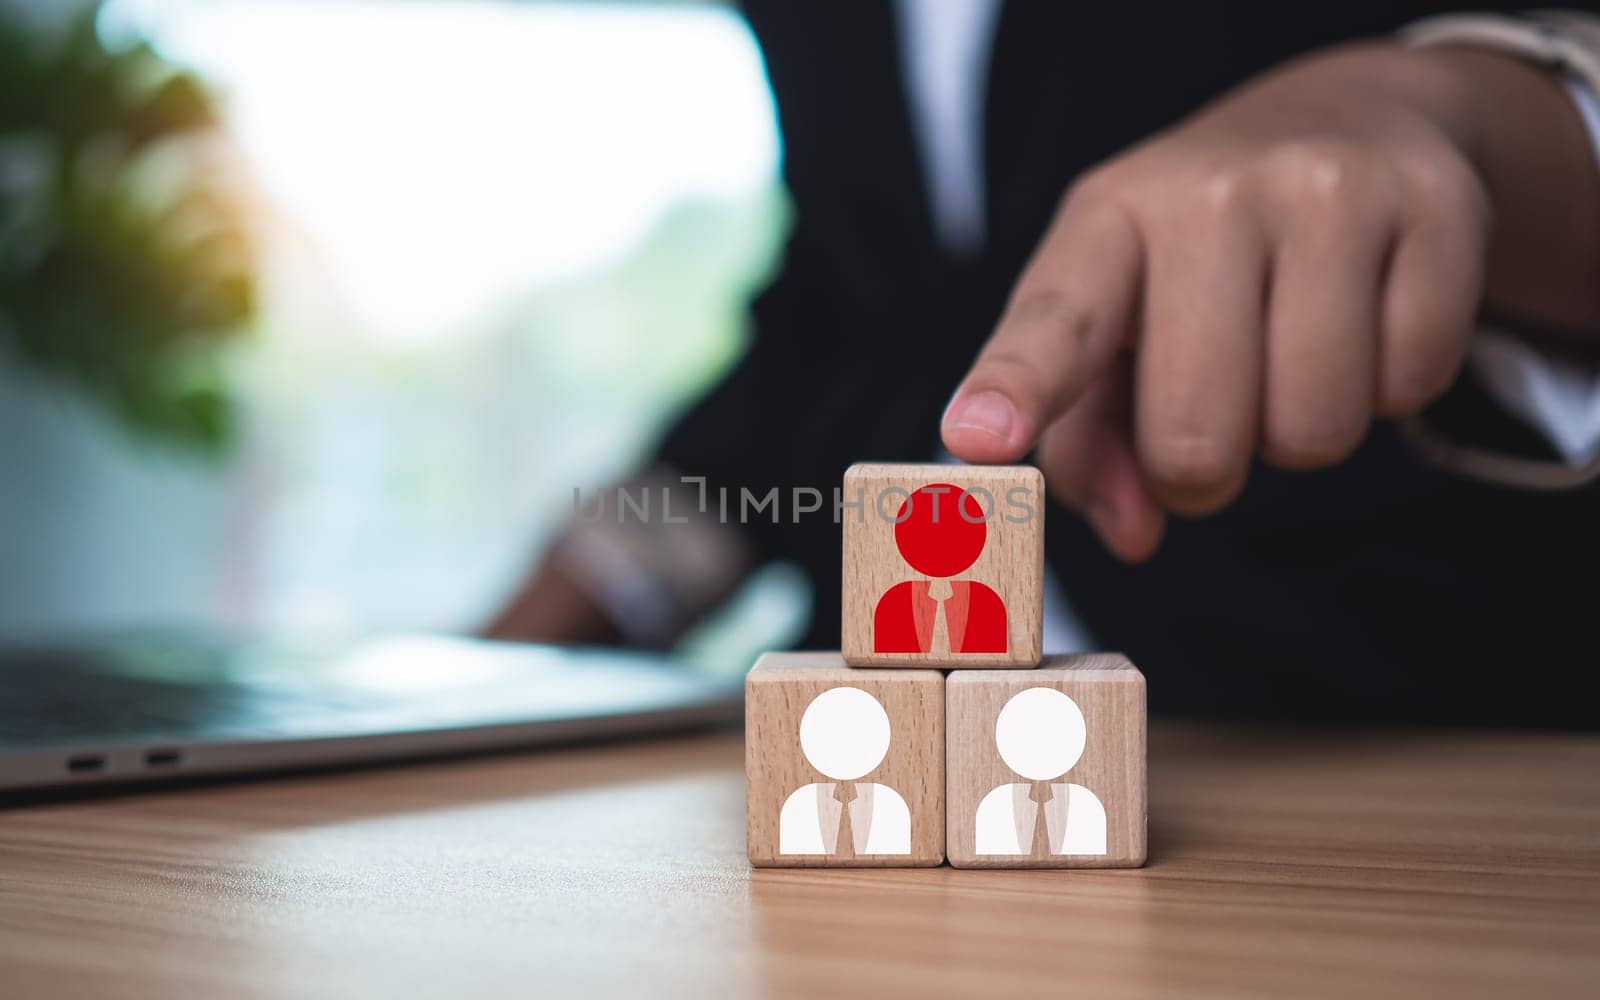 Wooden blocks with printed manager icons selected by businessmen to express human resource management and leadership concepts. by Unimages2527